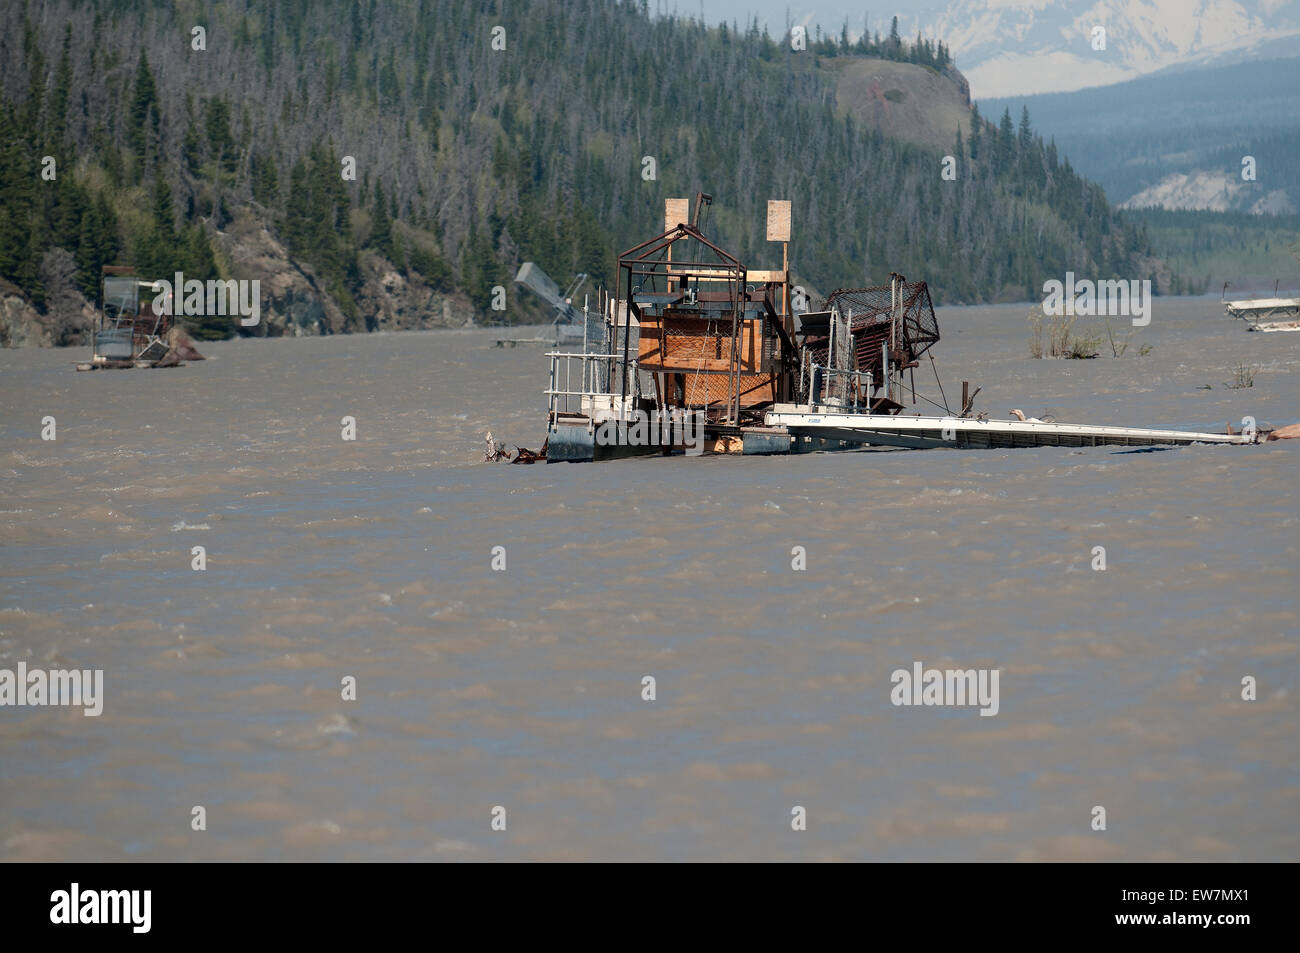 Large fish wheel on the Copper river in Alaska Stock Photo - Alamy